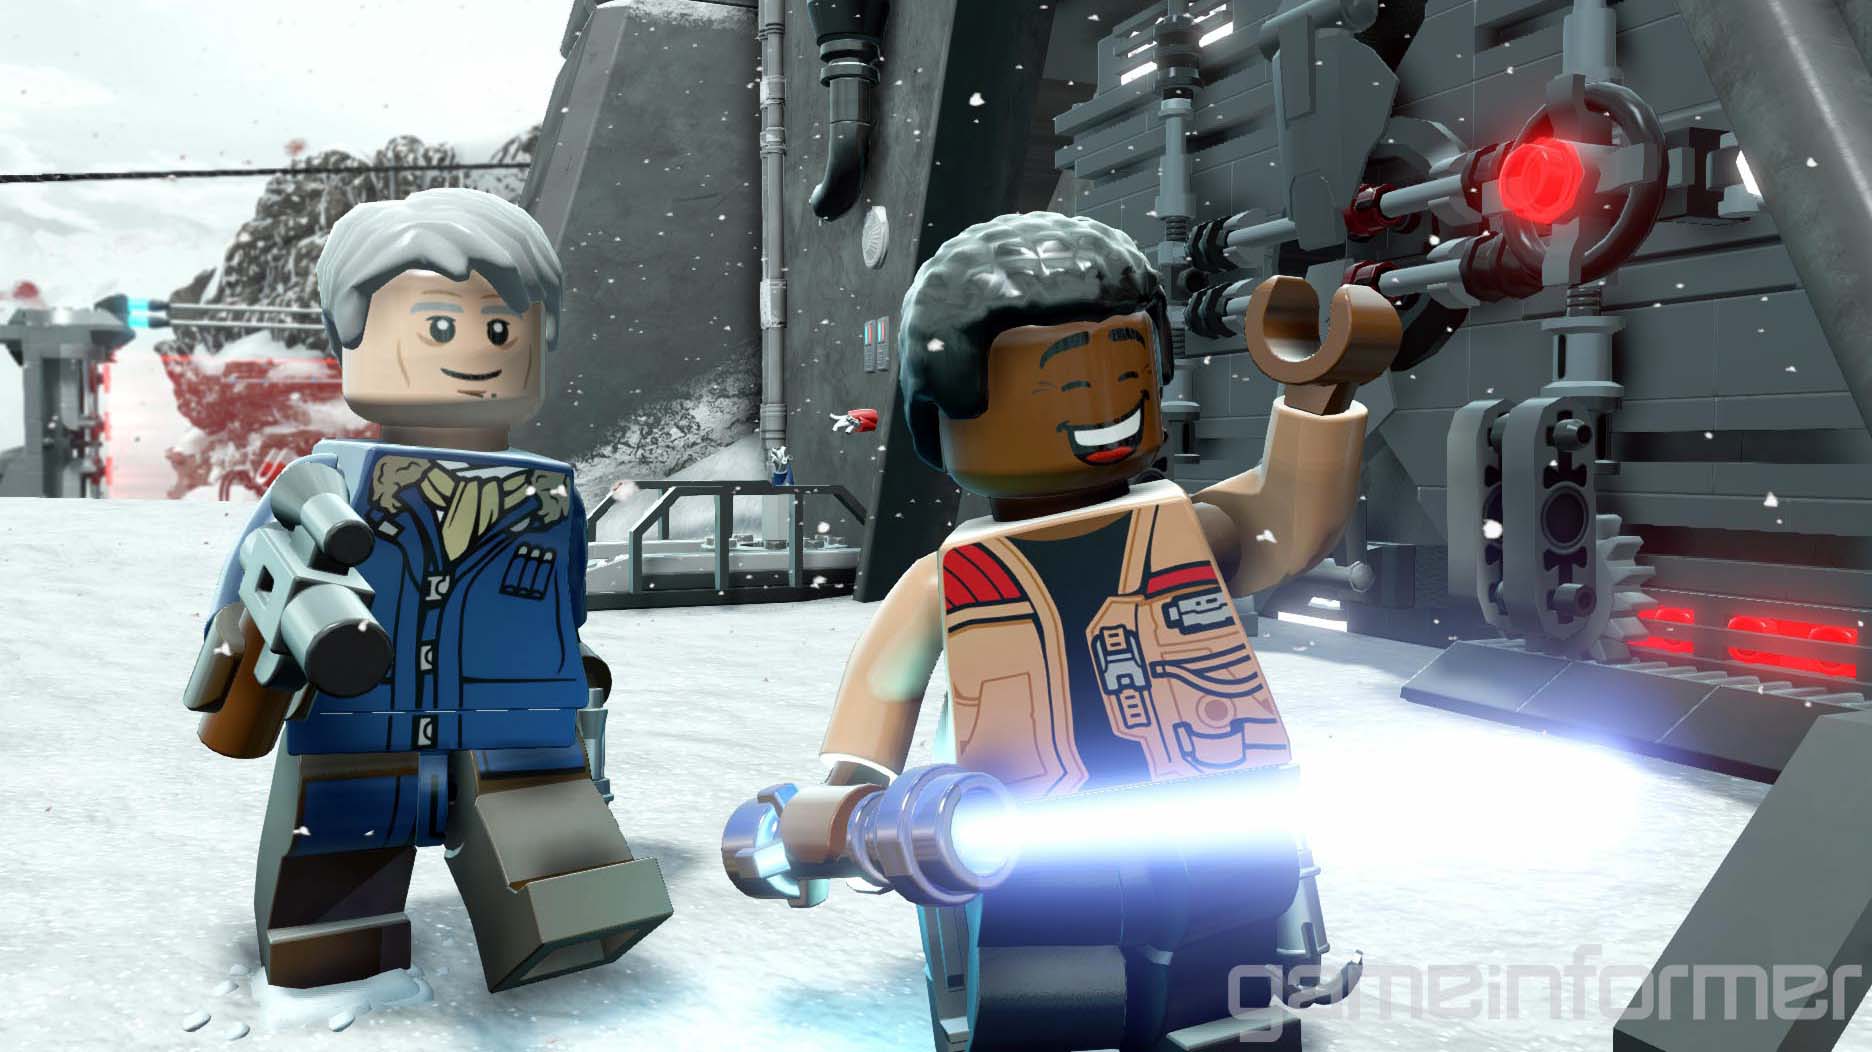 Lego Star Wars The Force Awakens 2016 Wallpapers 4K